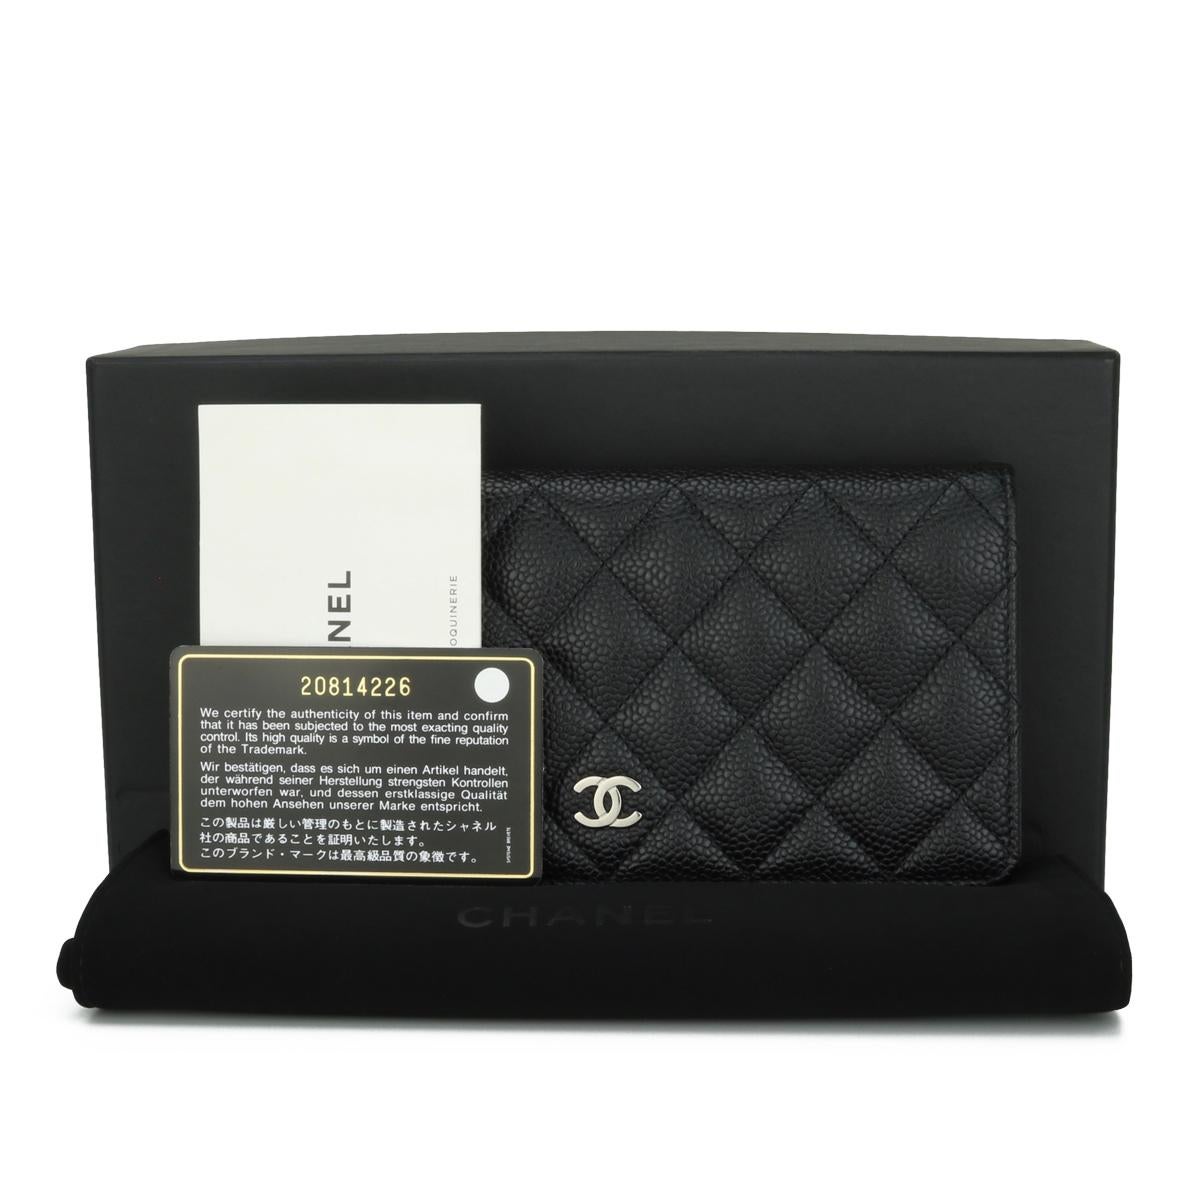 Chanel Quilted Classic Long Flap Yen Wallet in Black Caviar with Silver Hardware 2015.

This stunning wallet is in excellent condition, the wallet still holds its original shape, and the hardware is still very shiny.

- Exterior Condition: Excellent